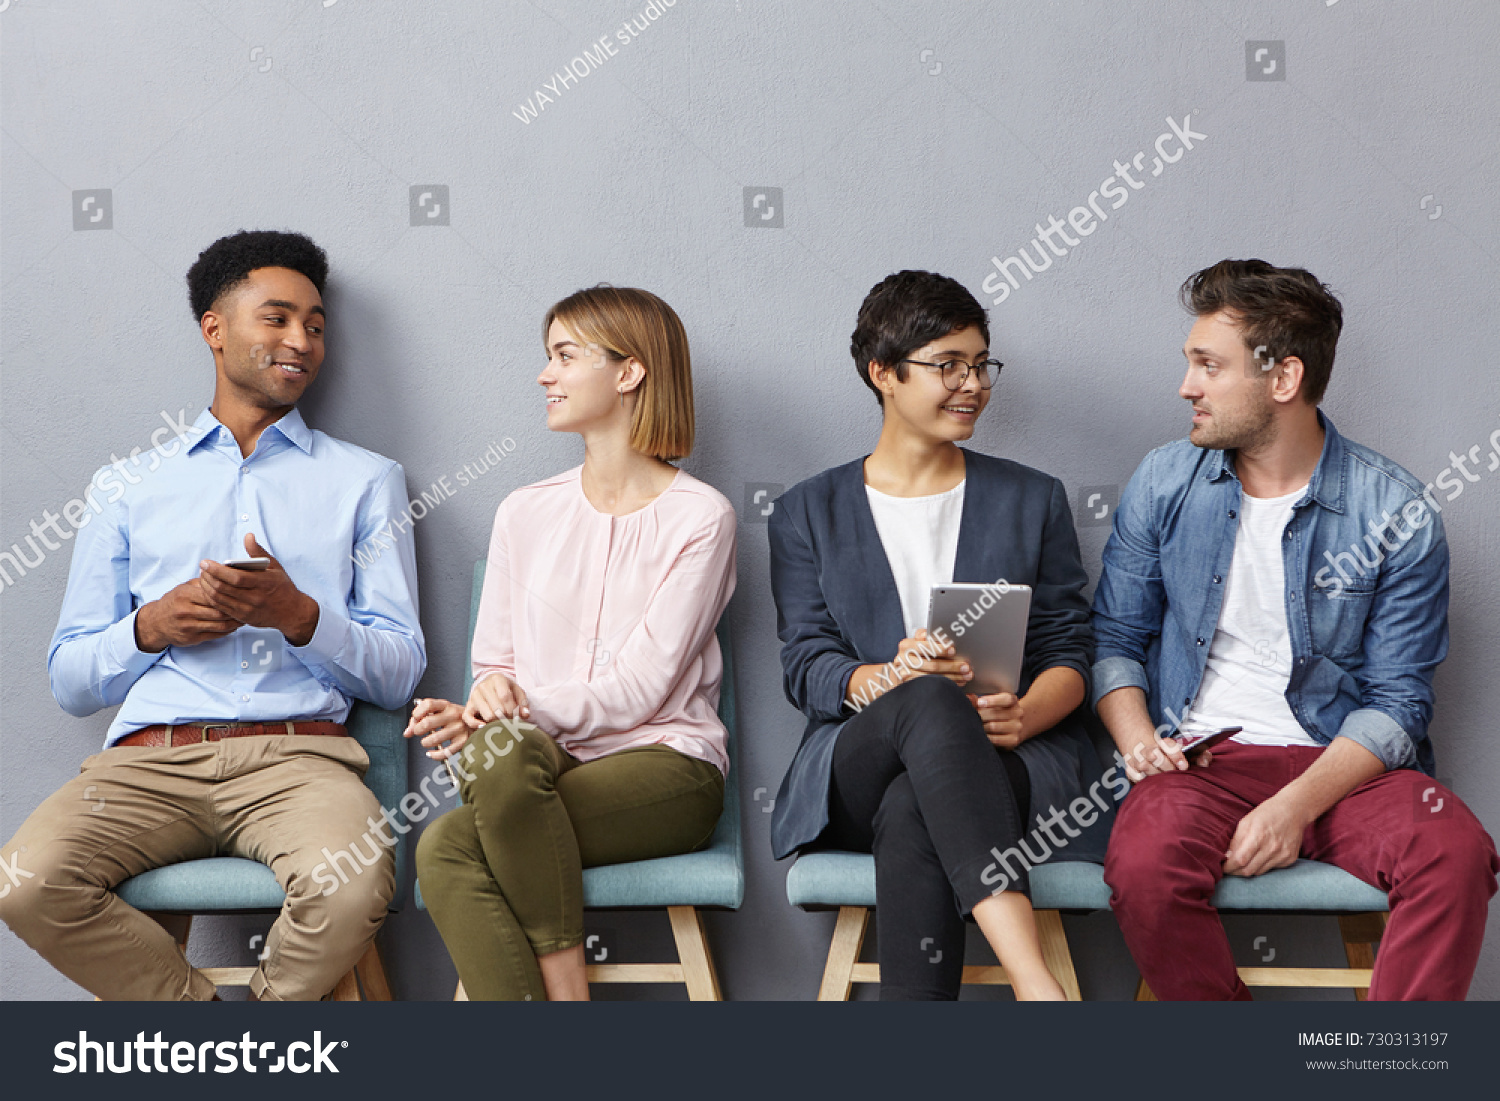 Horizontal portrait of people sit in queue, have pleasant conversation with each other, share ideas and life experience, isolated over grey concrete wall. Diverse group in row, speak and hold gadgets #730313197